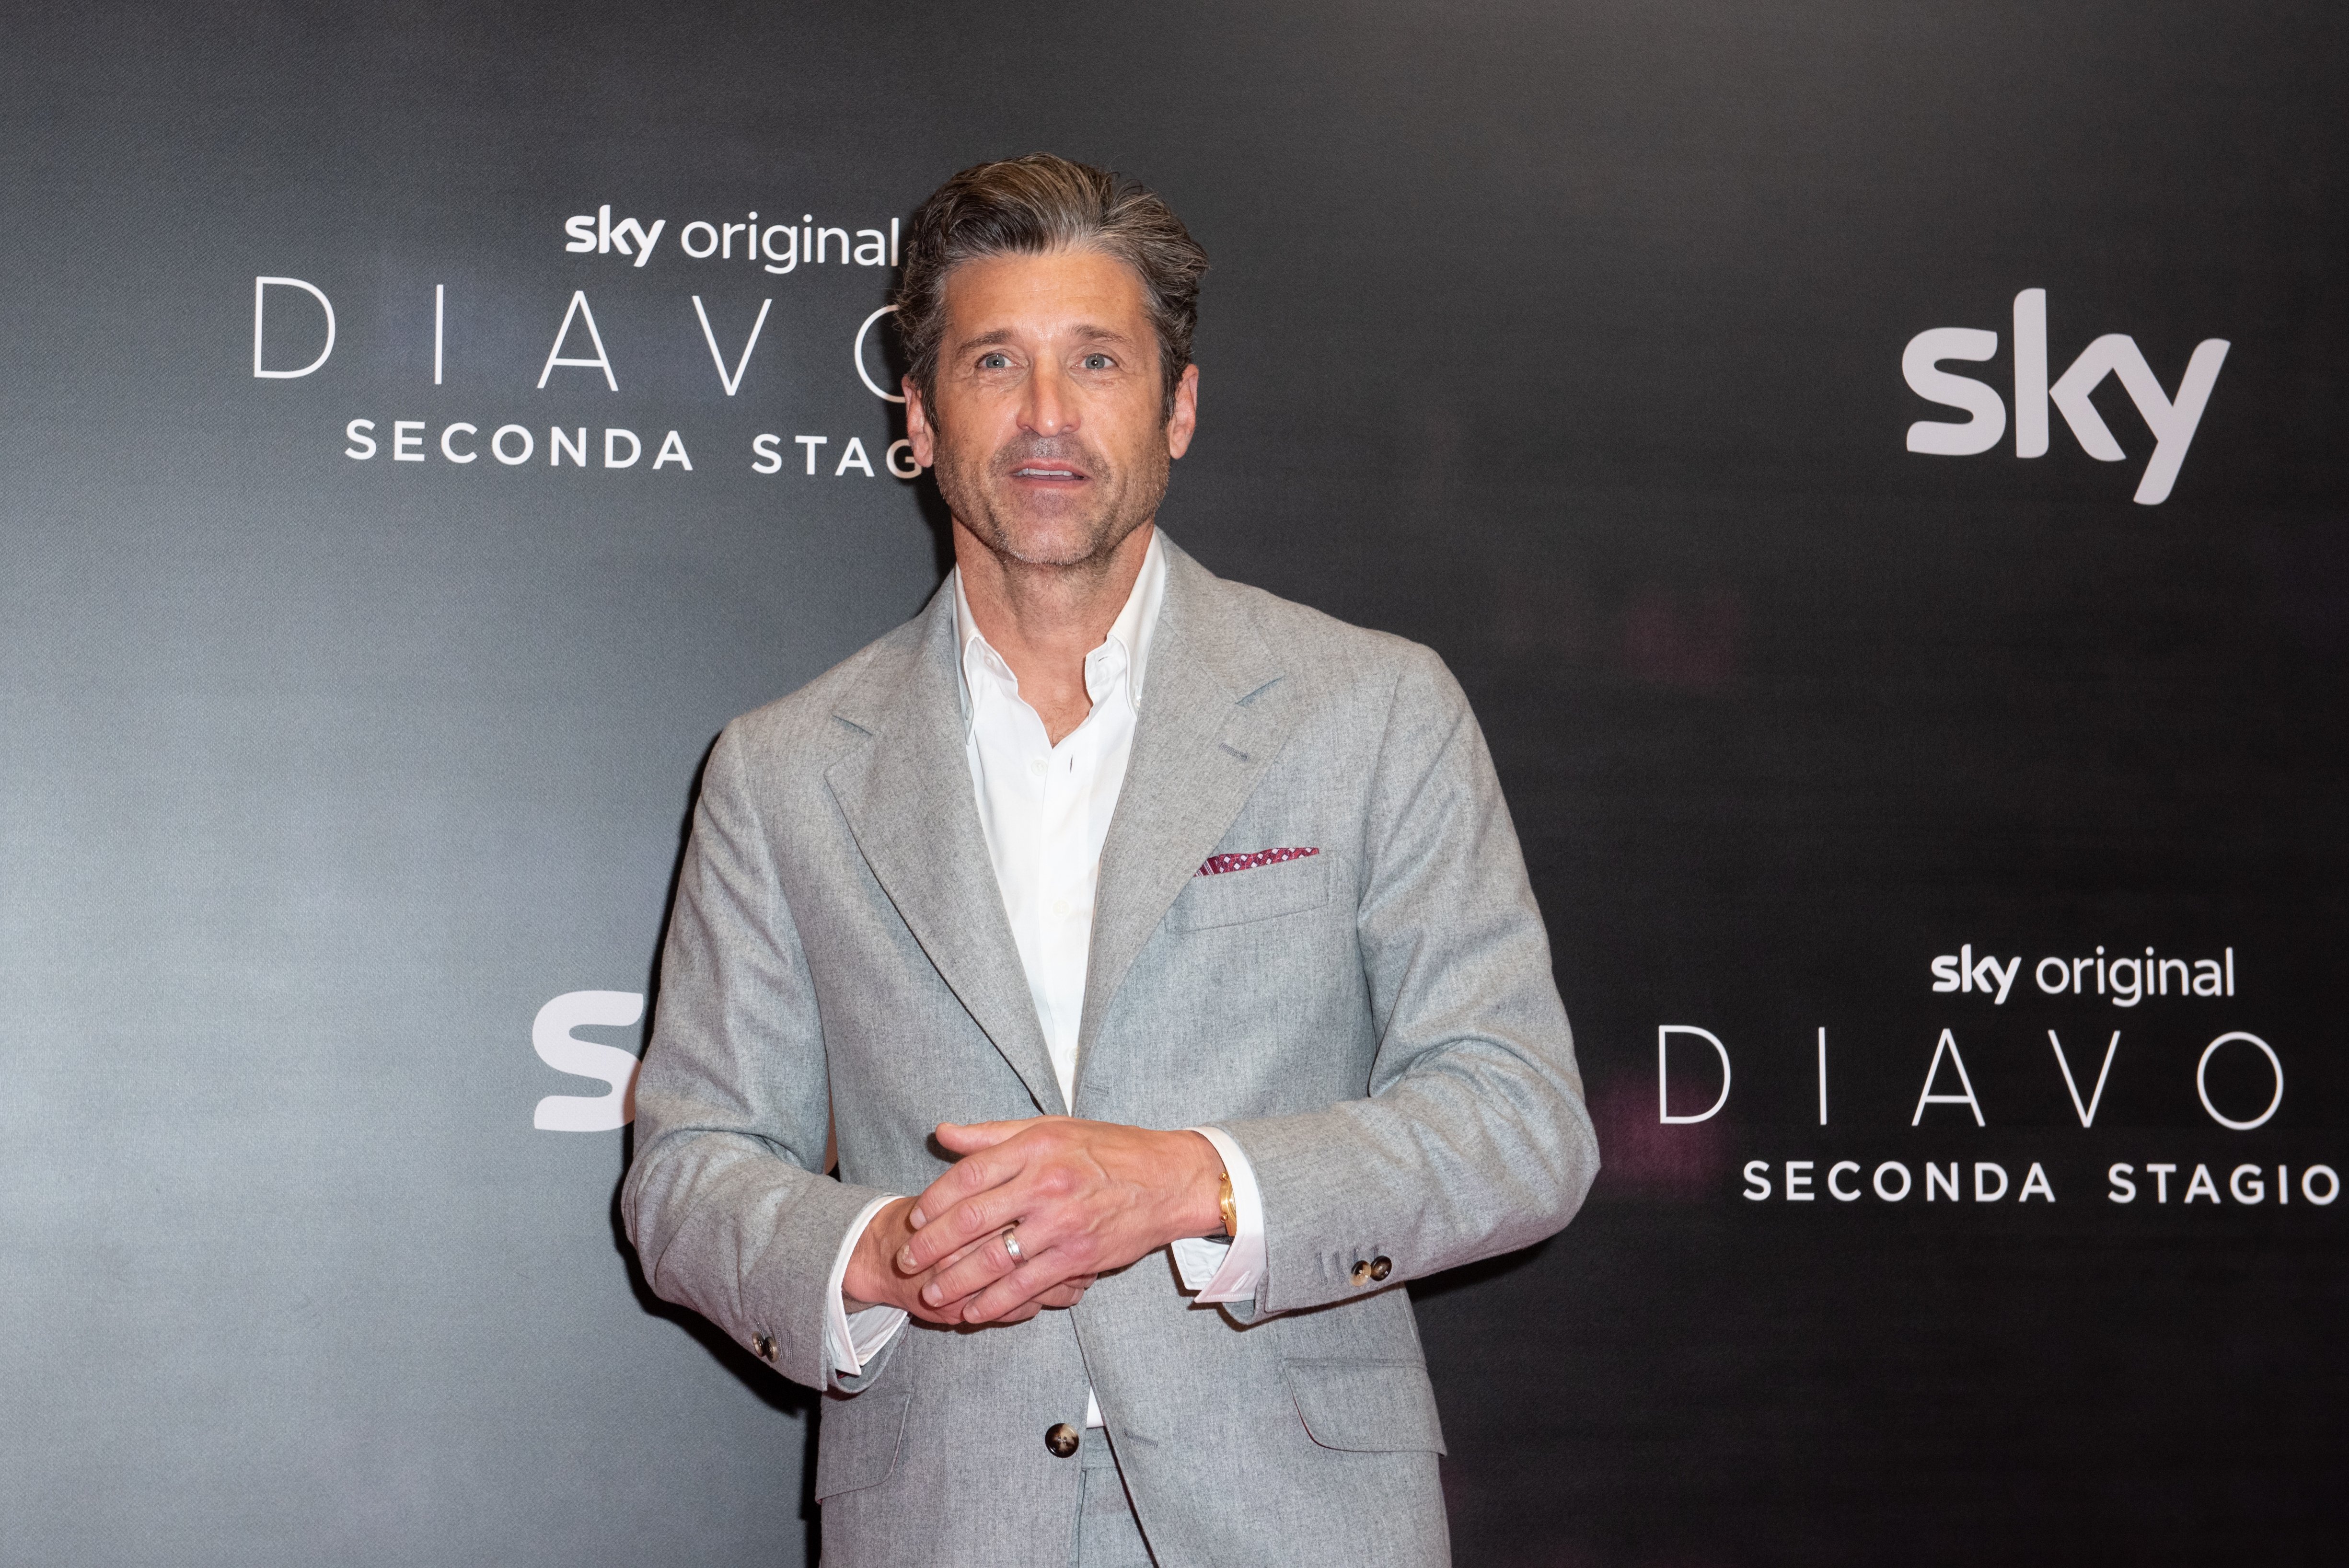 Patrick Dempsey during the photocall for the press presentation of the second season of Devils, produced by Sky Original. Milan (Italy), April 8, 2022. | Source: Getty Images 